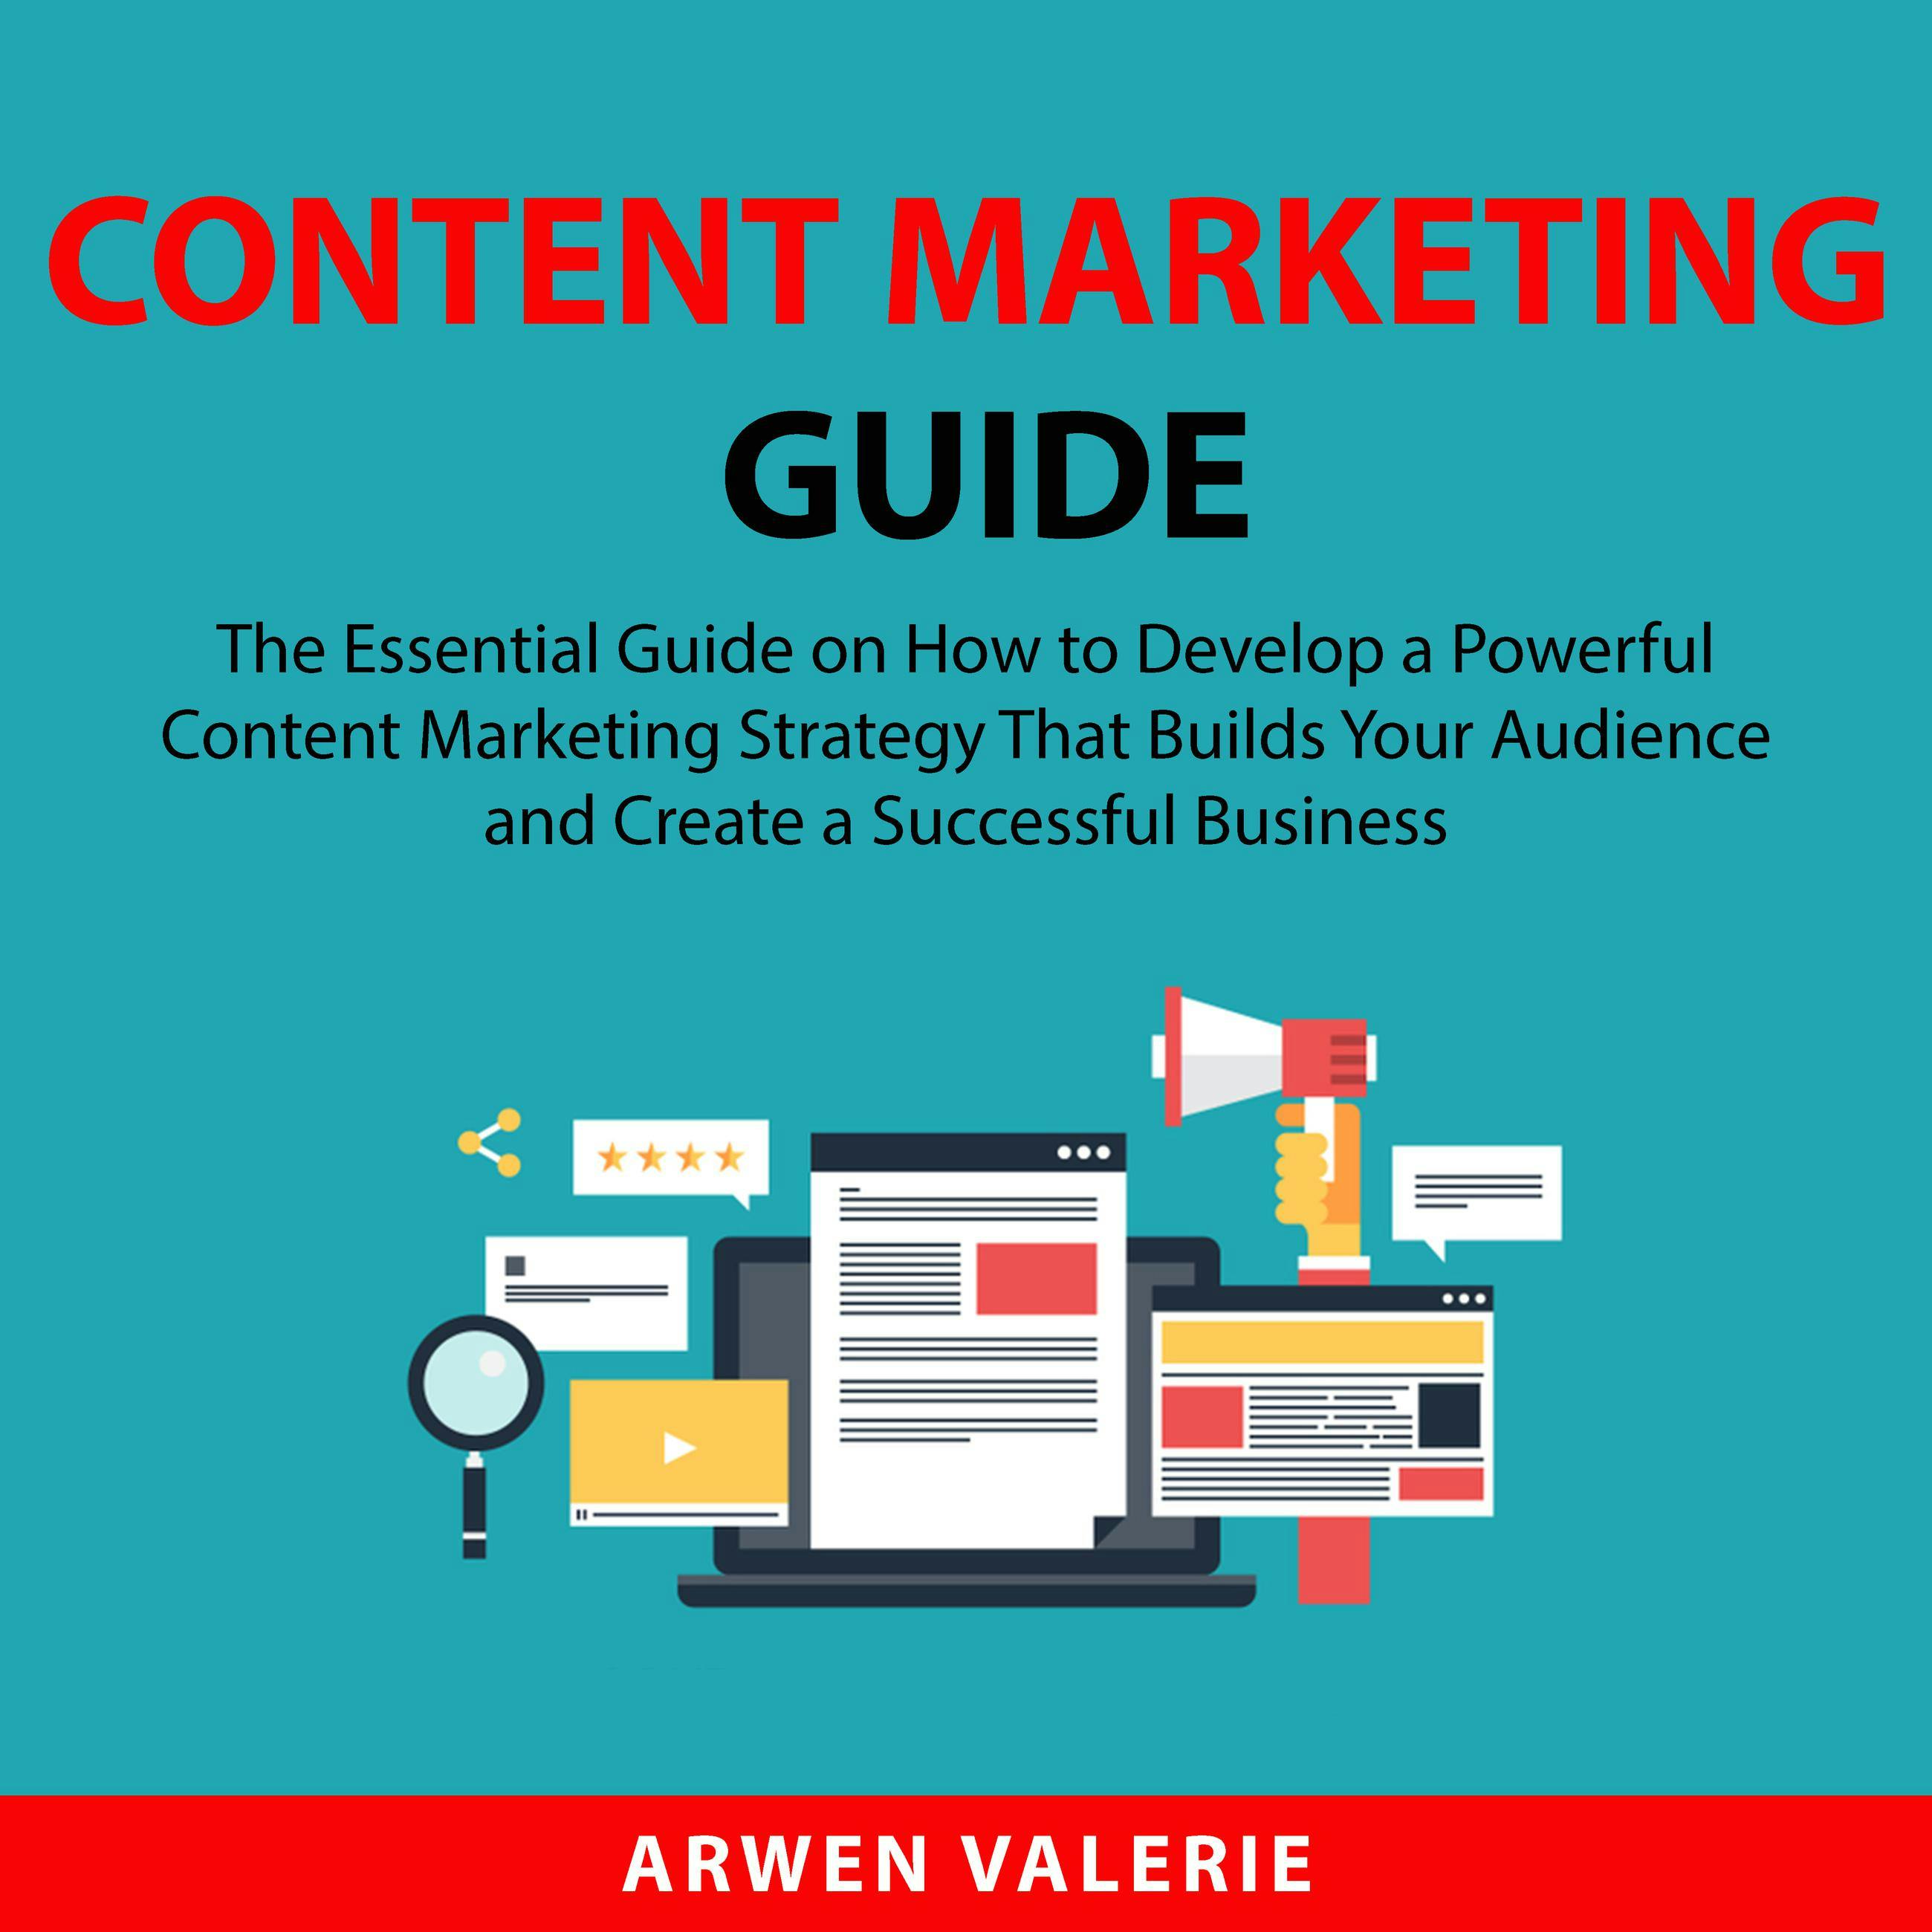 Content Marketing Guide: The Essential Guide on How to Develop a Powerful Content Marketing Strategy That Builds Your Audience and Create a Successful Business - Arwen Valerie